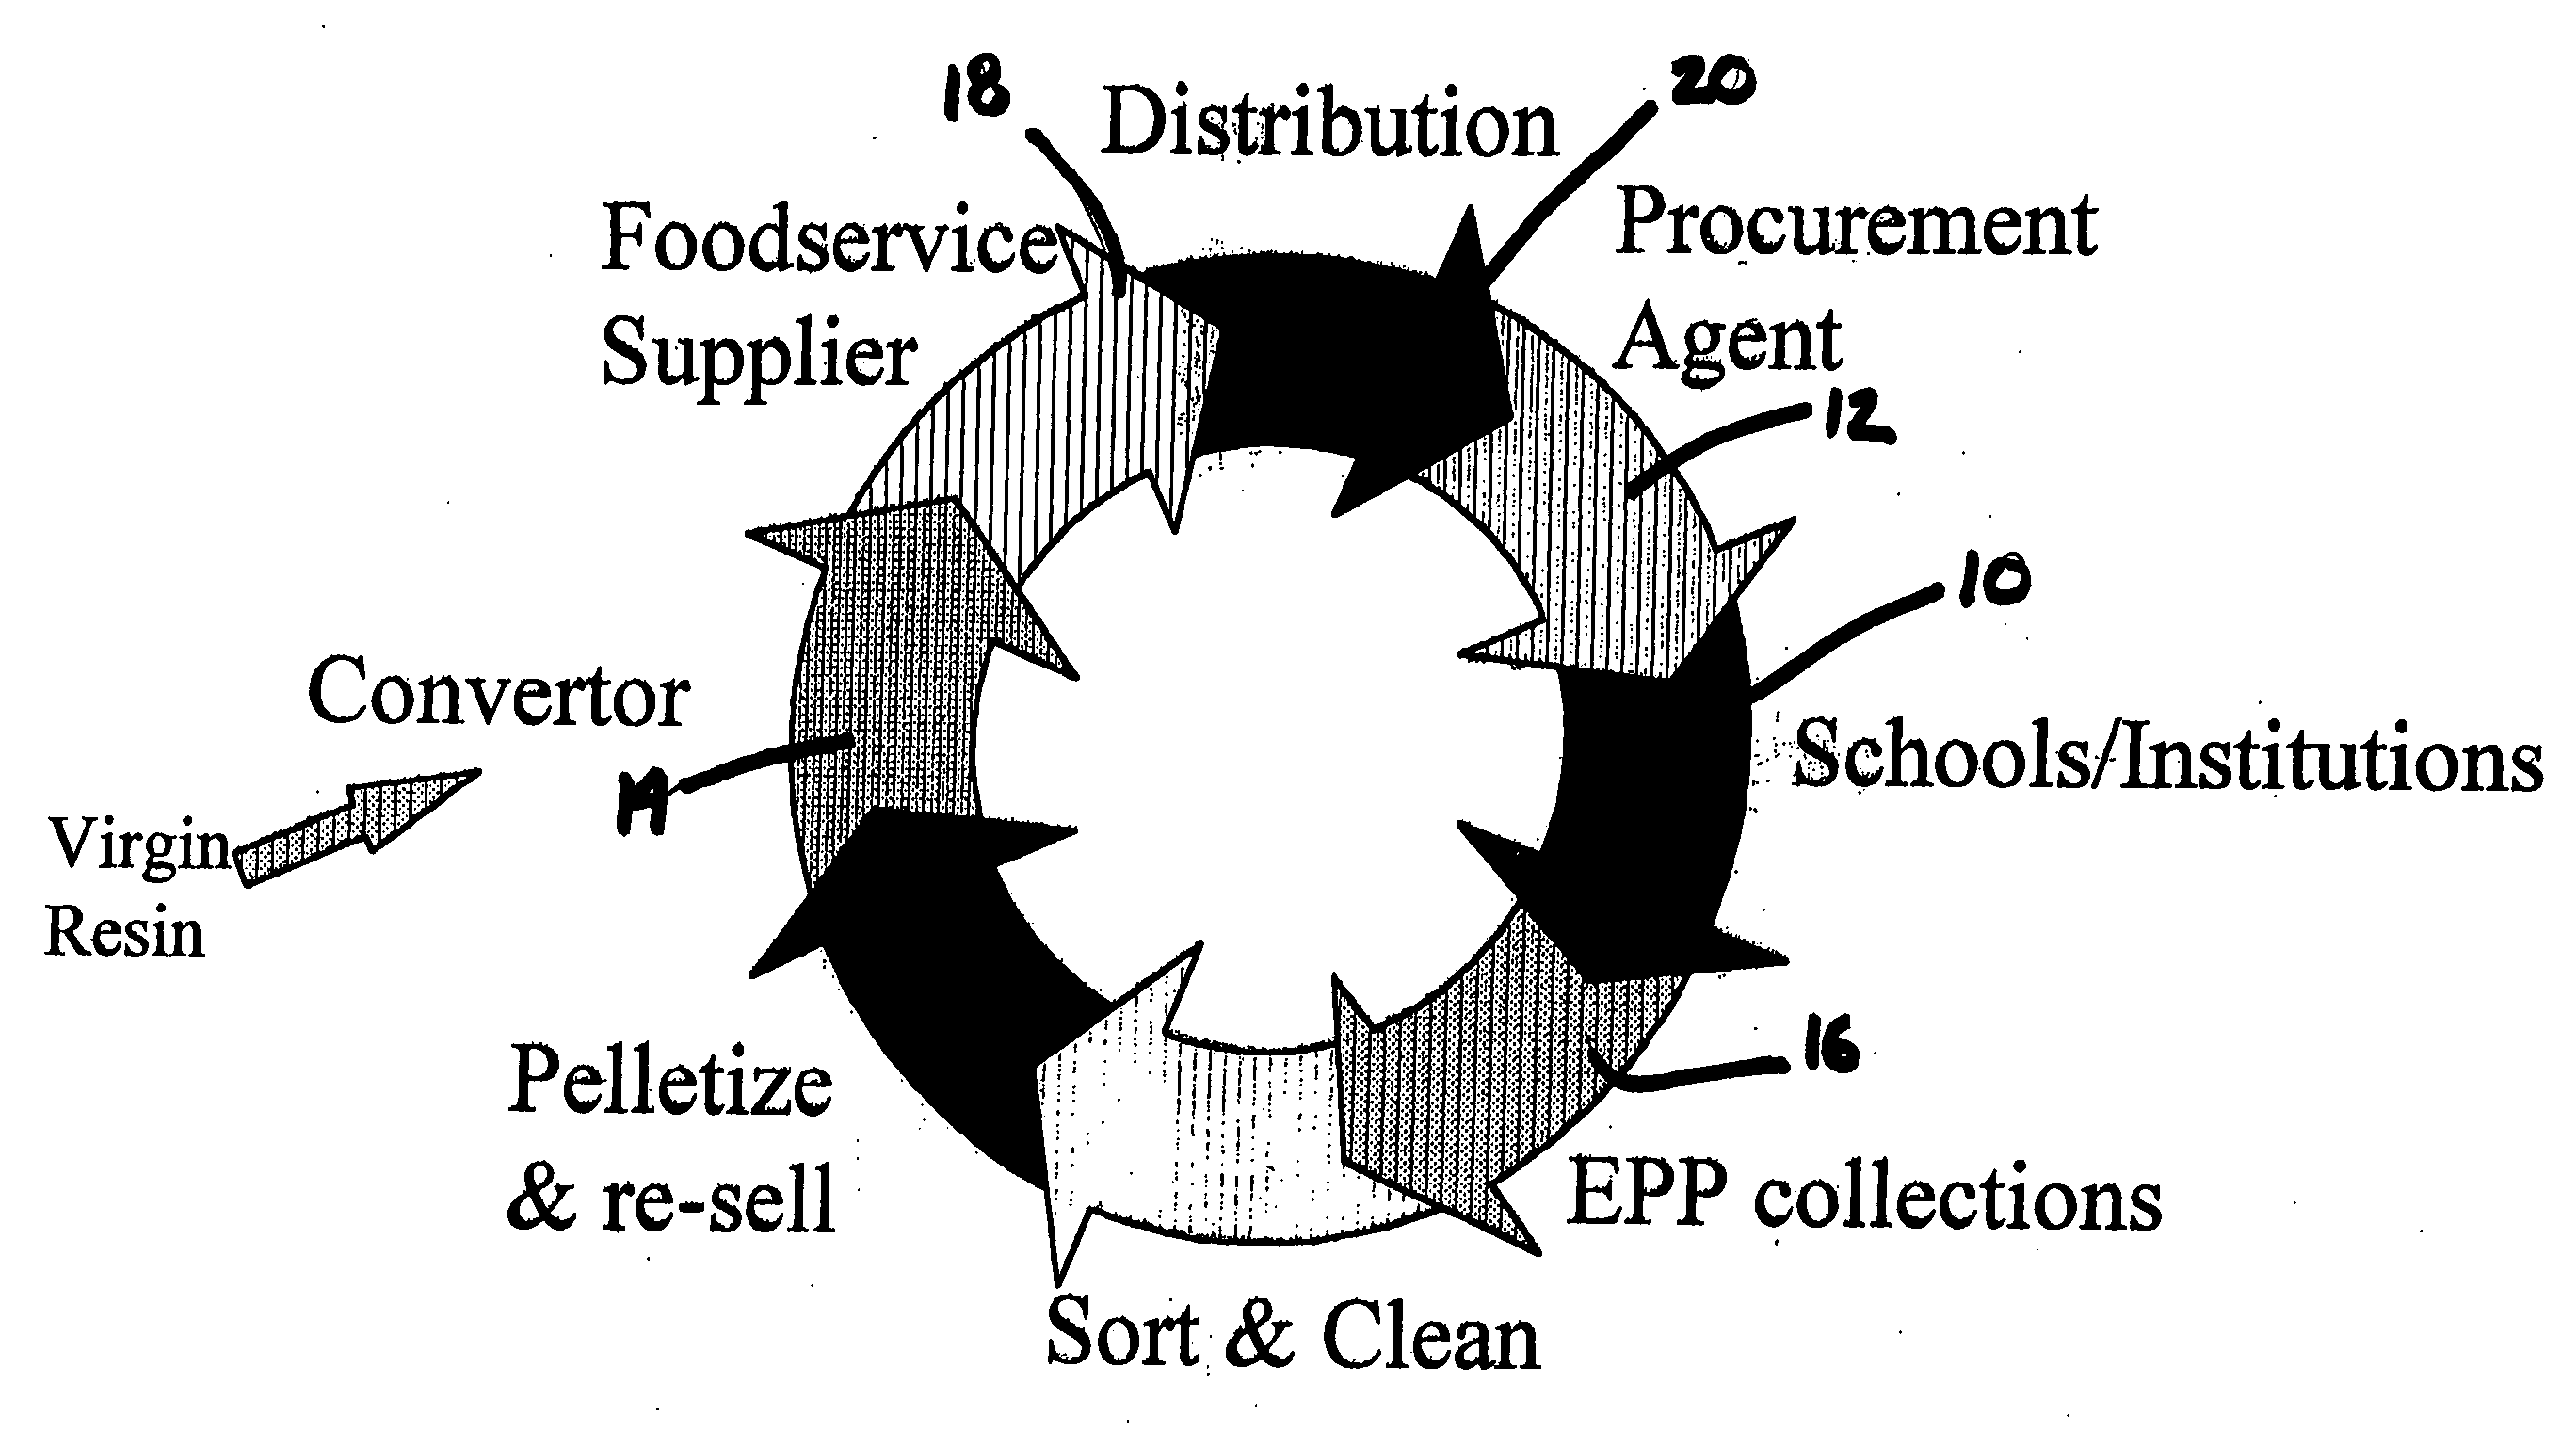 Closed-loop control system for recycling products